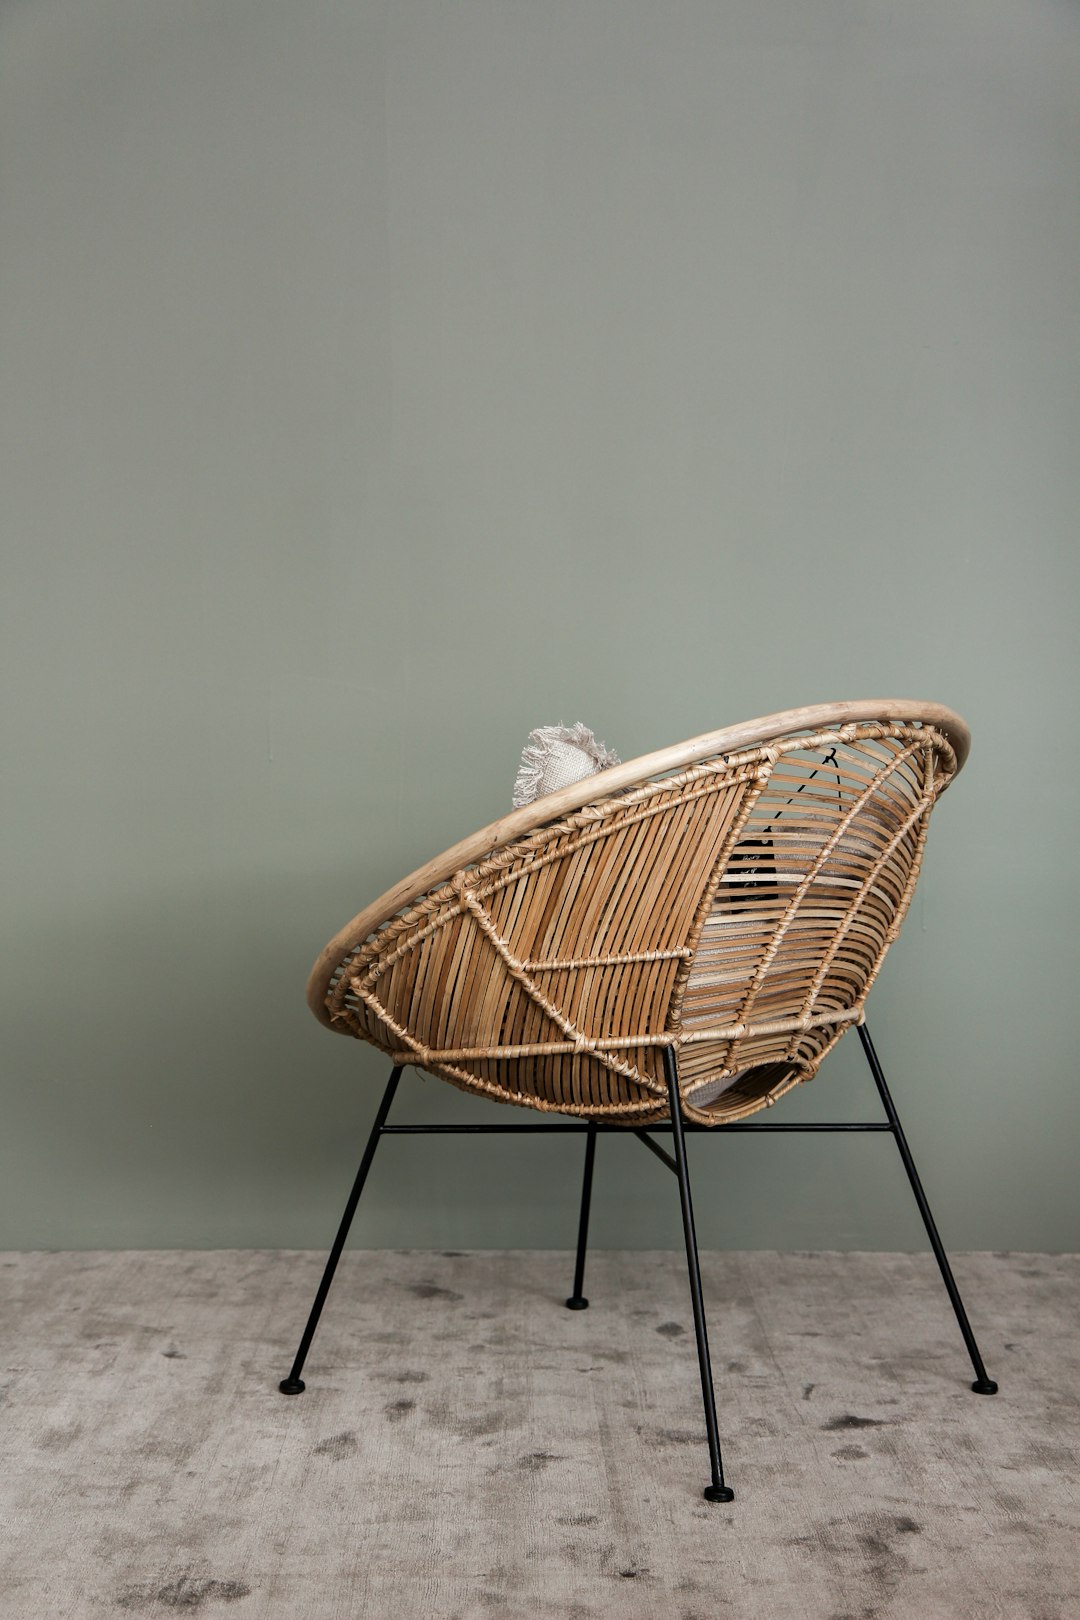 brown wicker chair on white sand